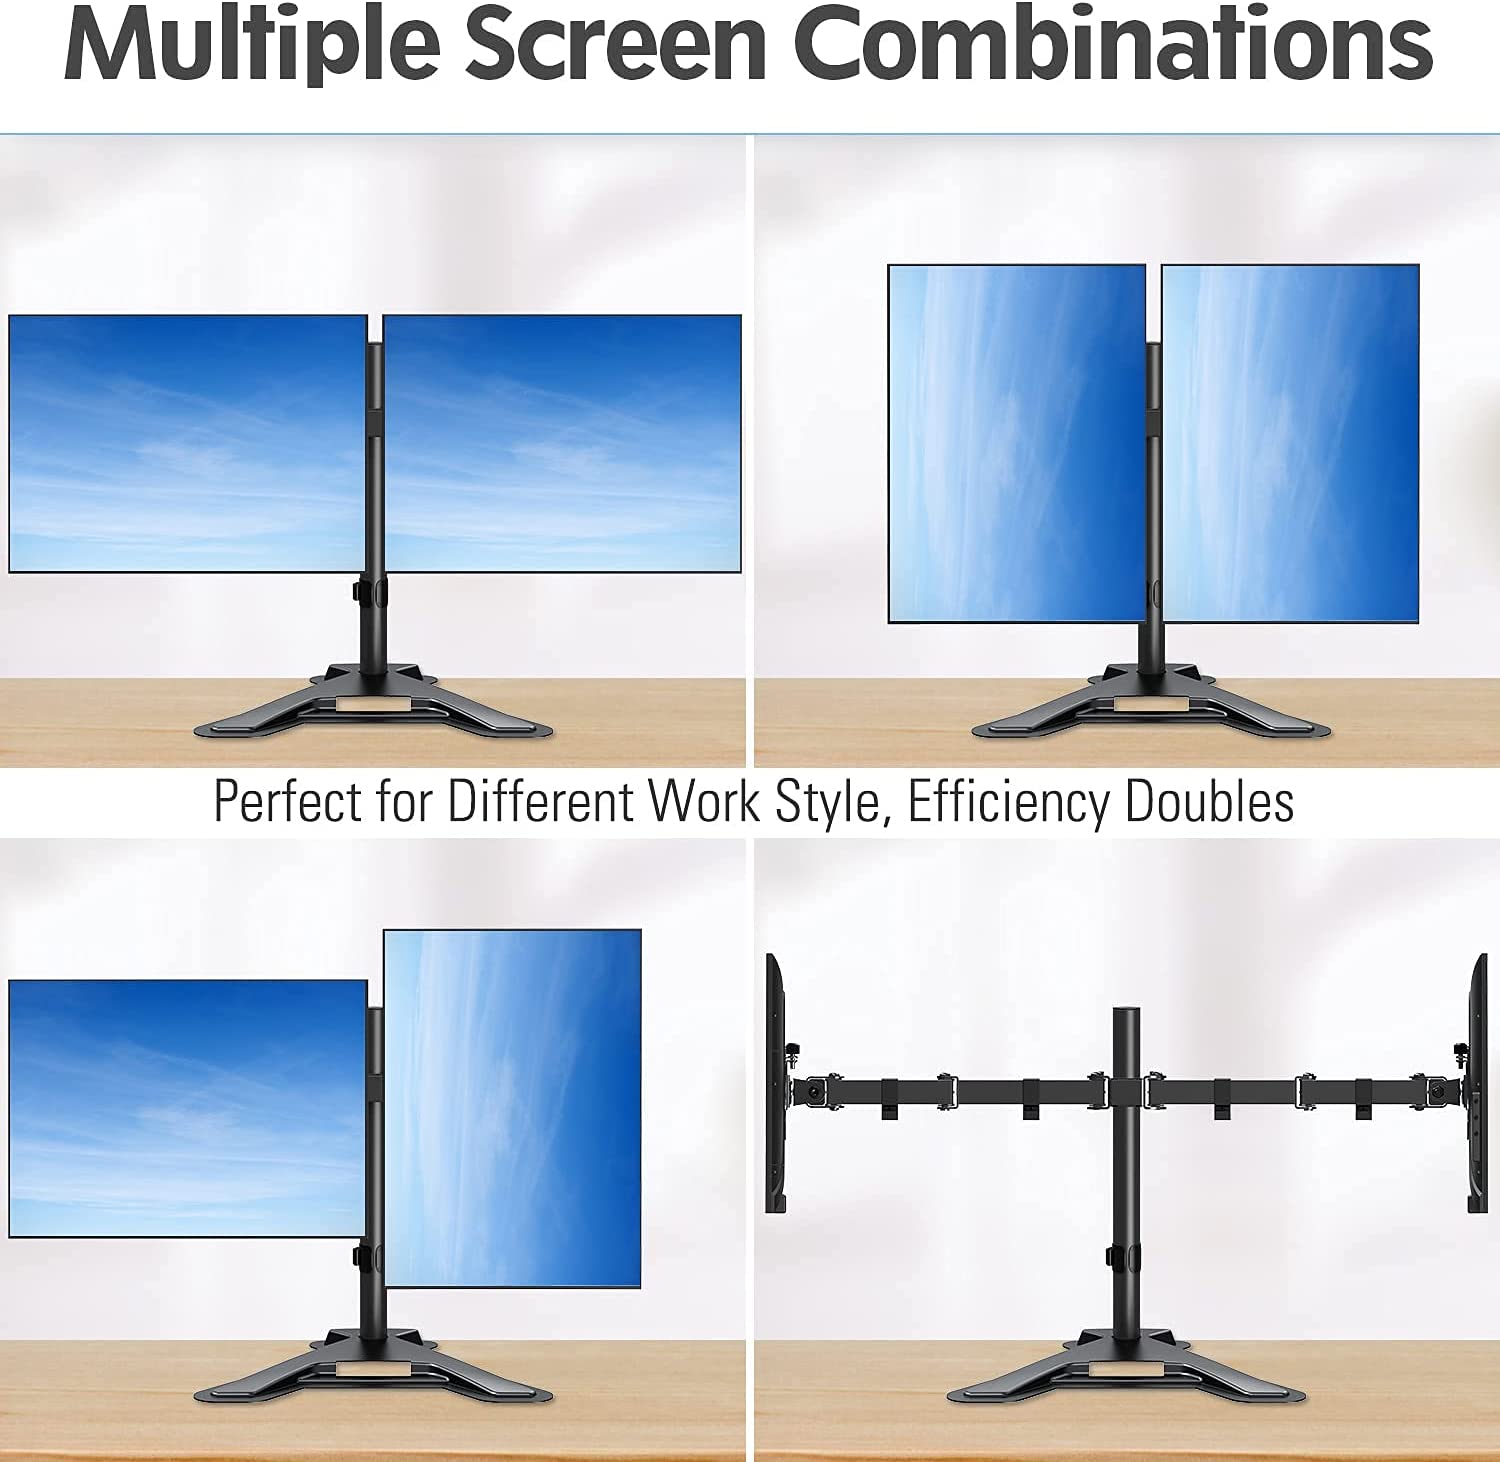 dual monitor arm provides multiple screen combinations